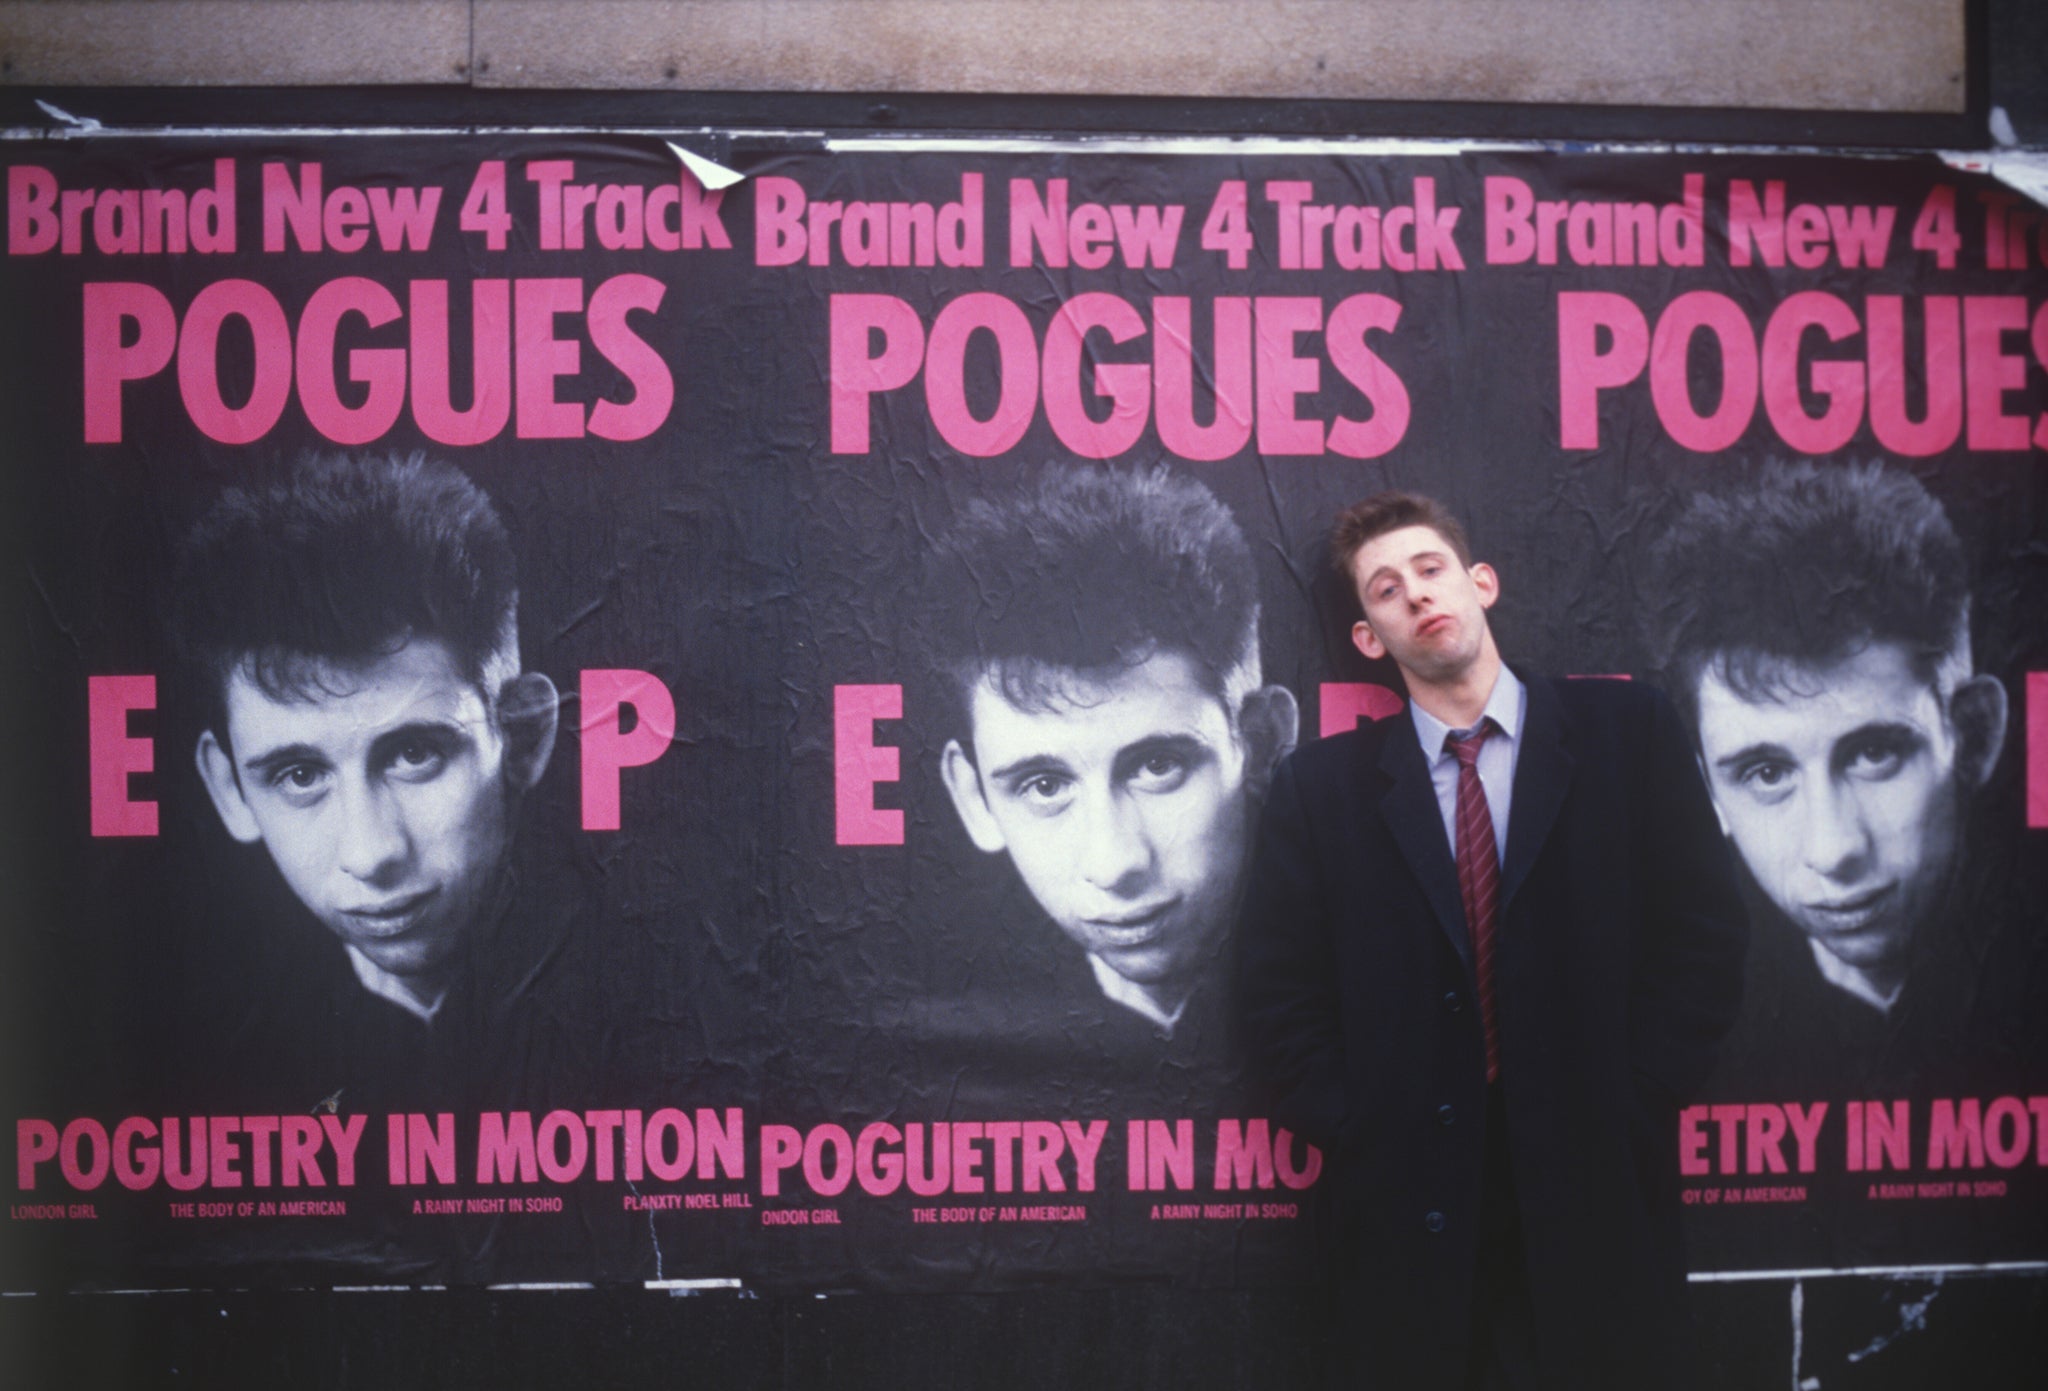 The measure of our dreams: MacGowan by posters for 1986’s ‘Poguetry in Motion’ EP